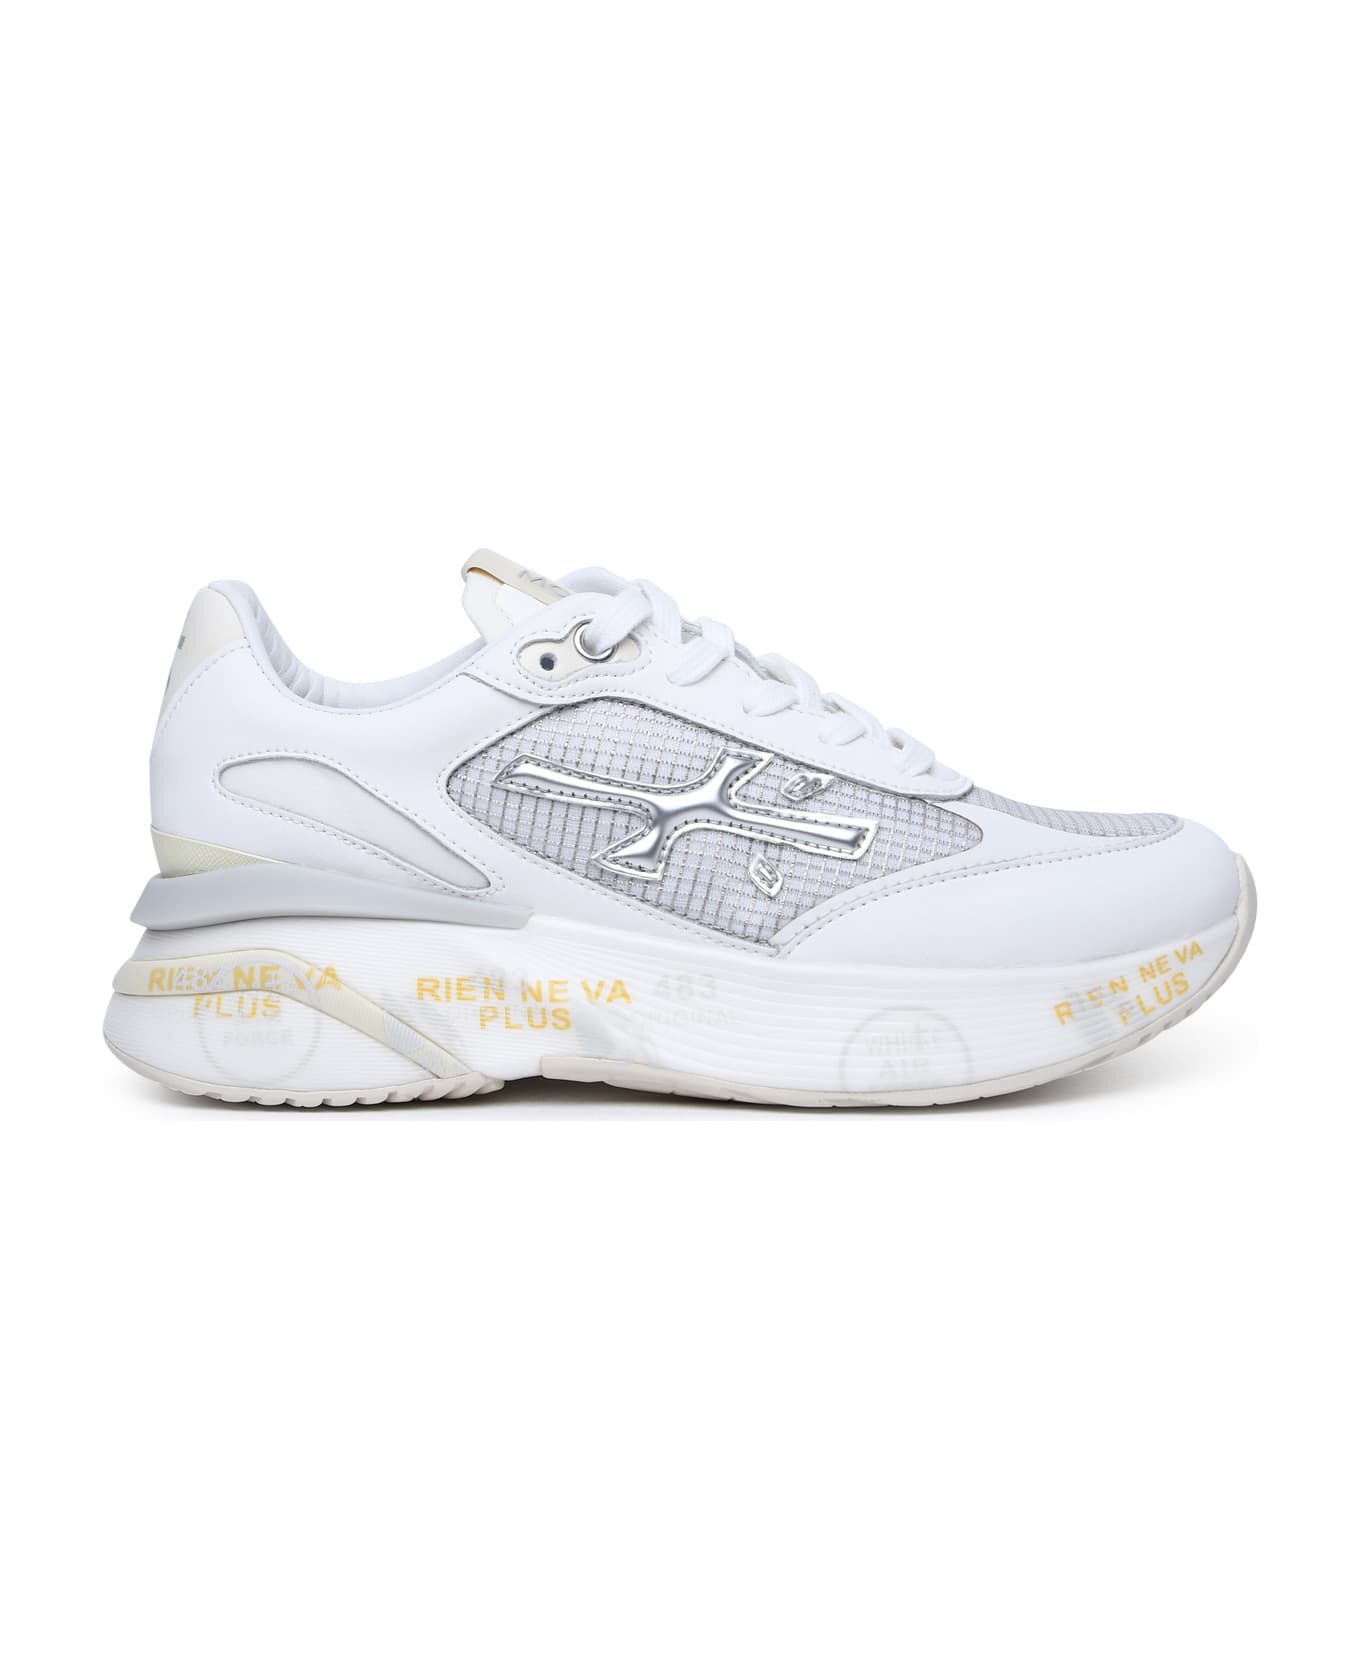 Premiata 'moerund' Sneakers In Leather And White Fabric - Bianco スニーカー